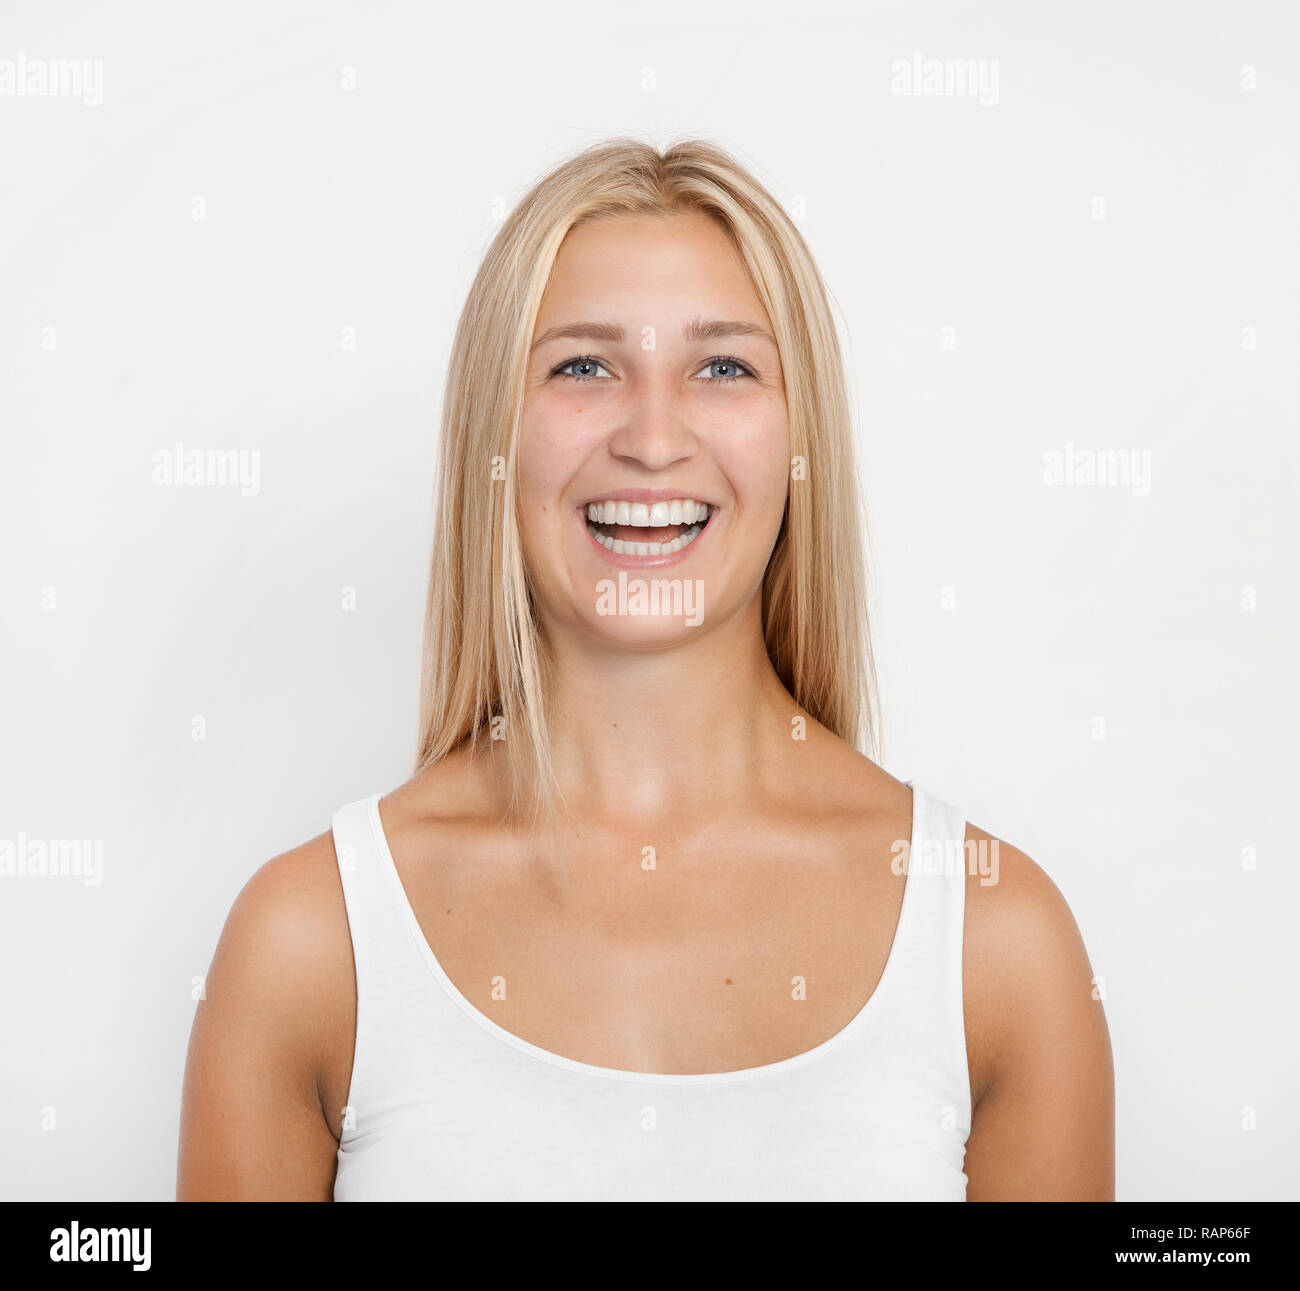 a young blond woman with blue eyes laughs at the camera, white background, isolated Stock Photo